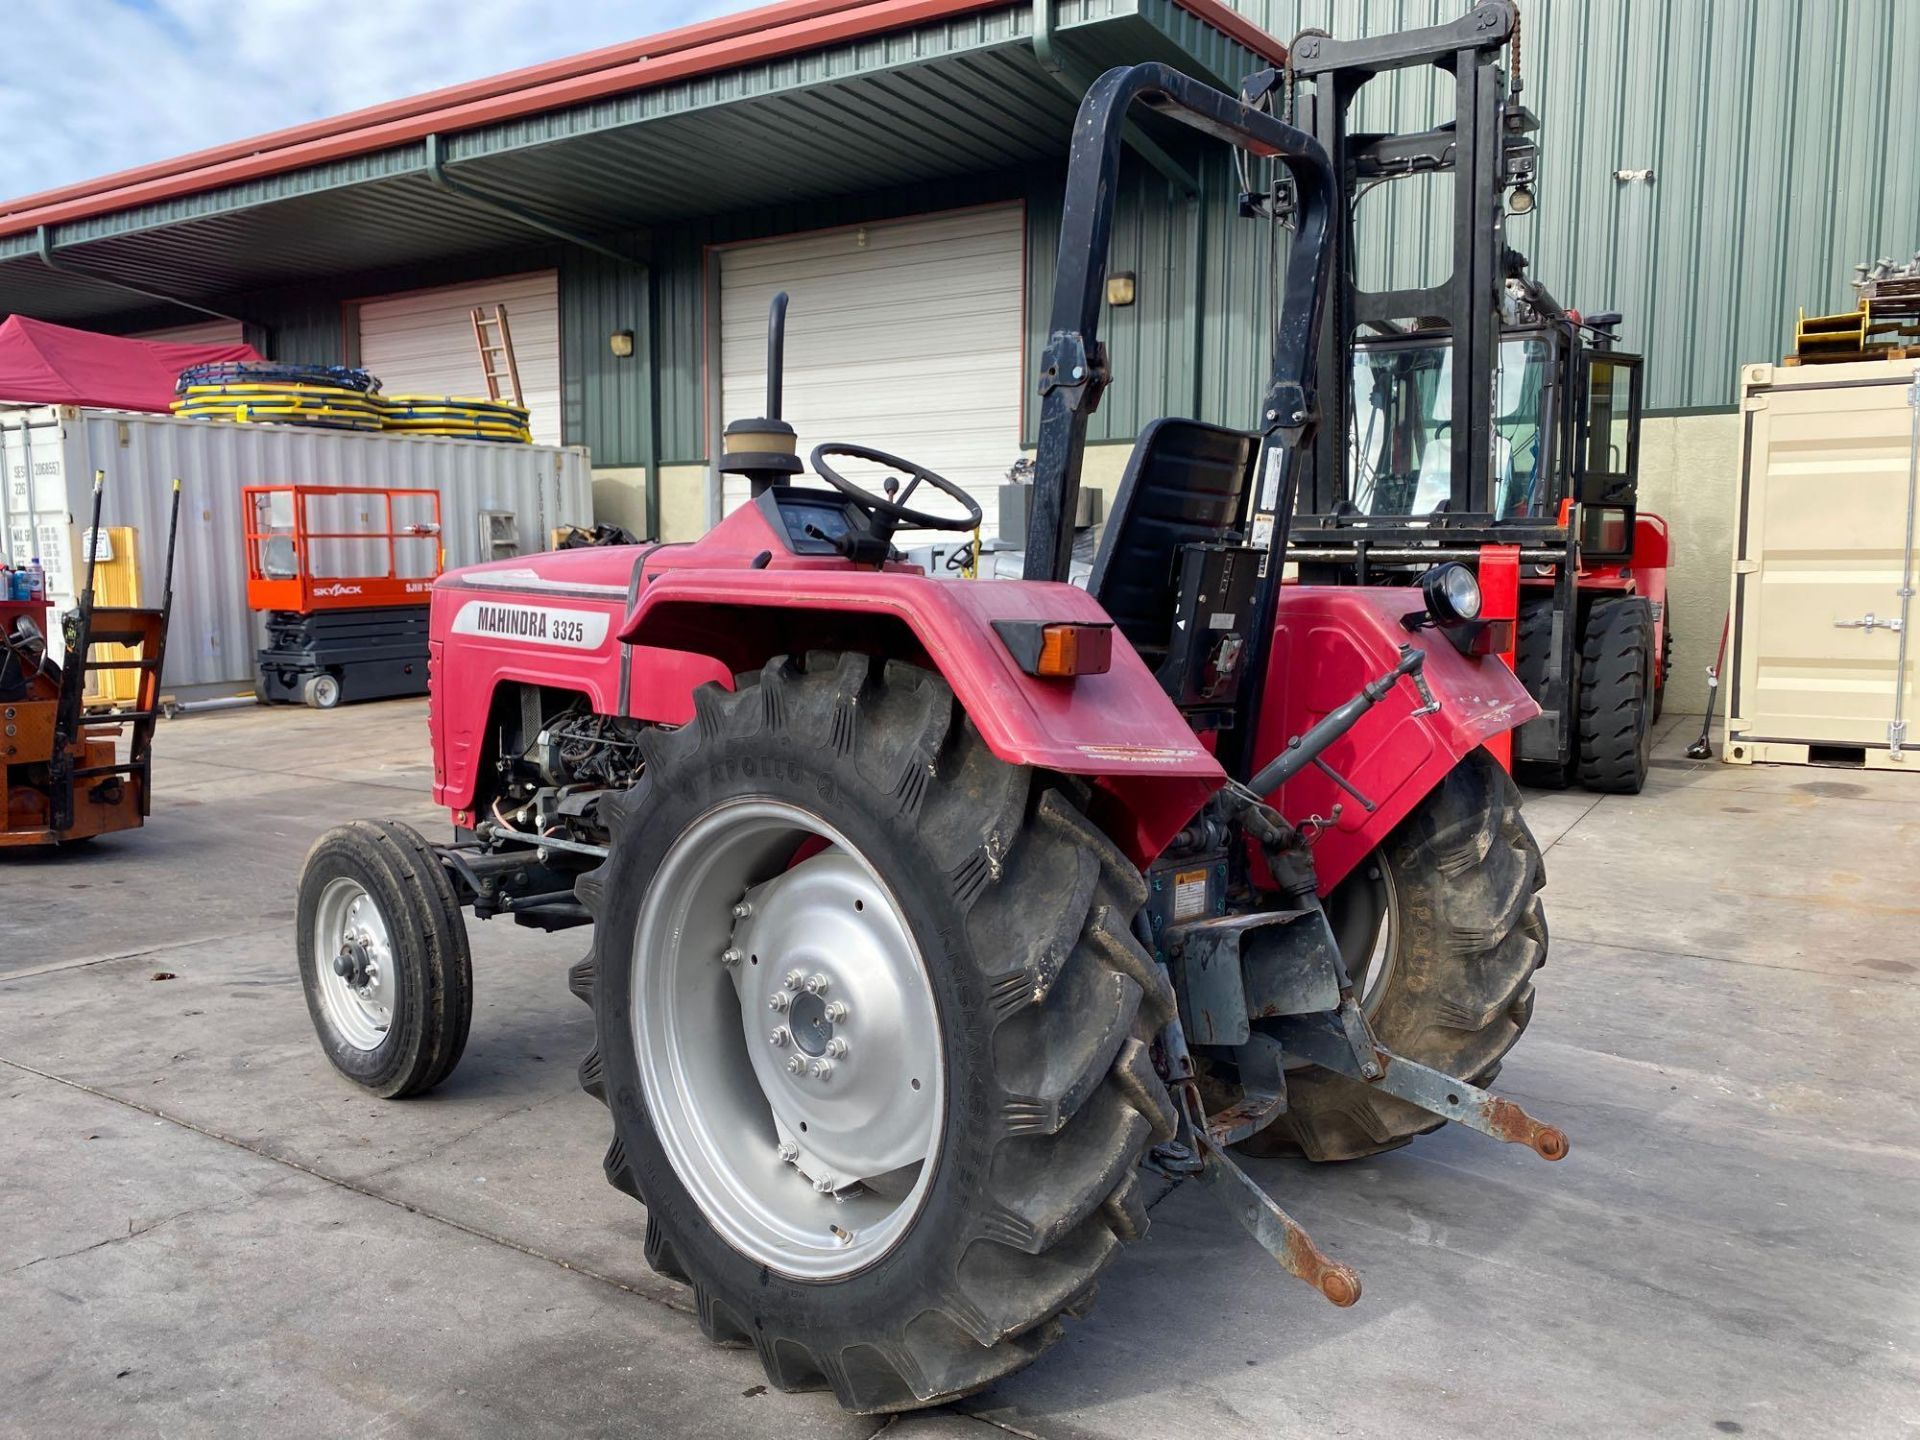 MAHINDRA 3325DI DIESEL TRACTOR, PTO, 3 POINT HITCH, RUNS AND DRIVES - Image 16 of 26